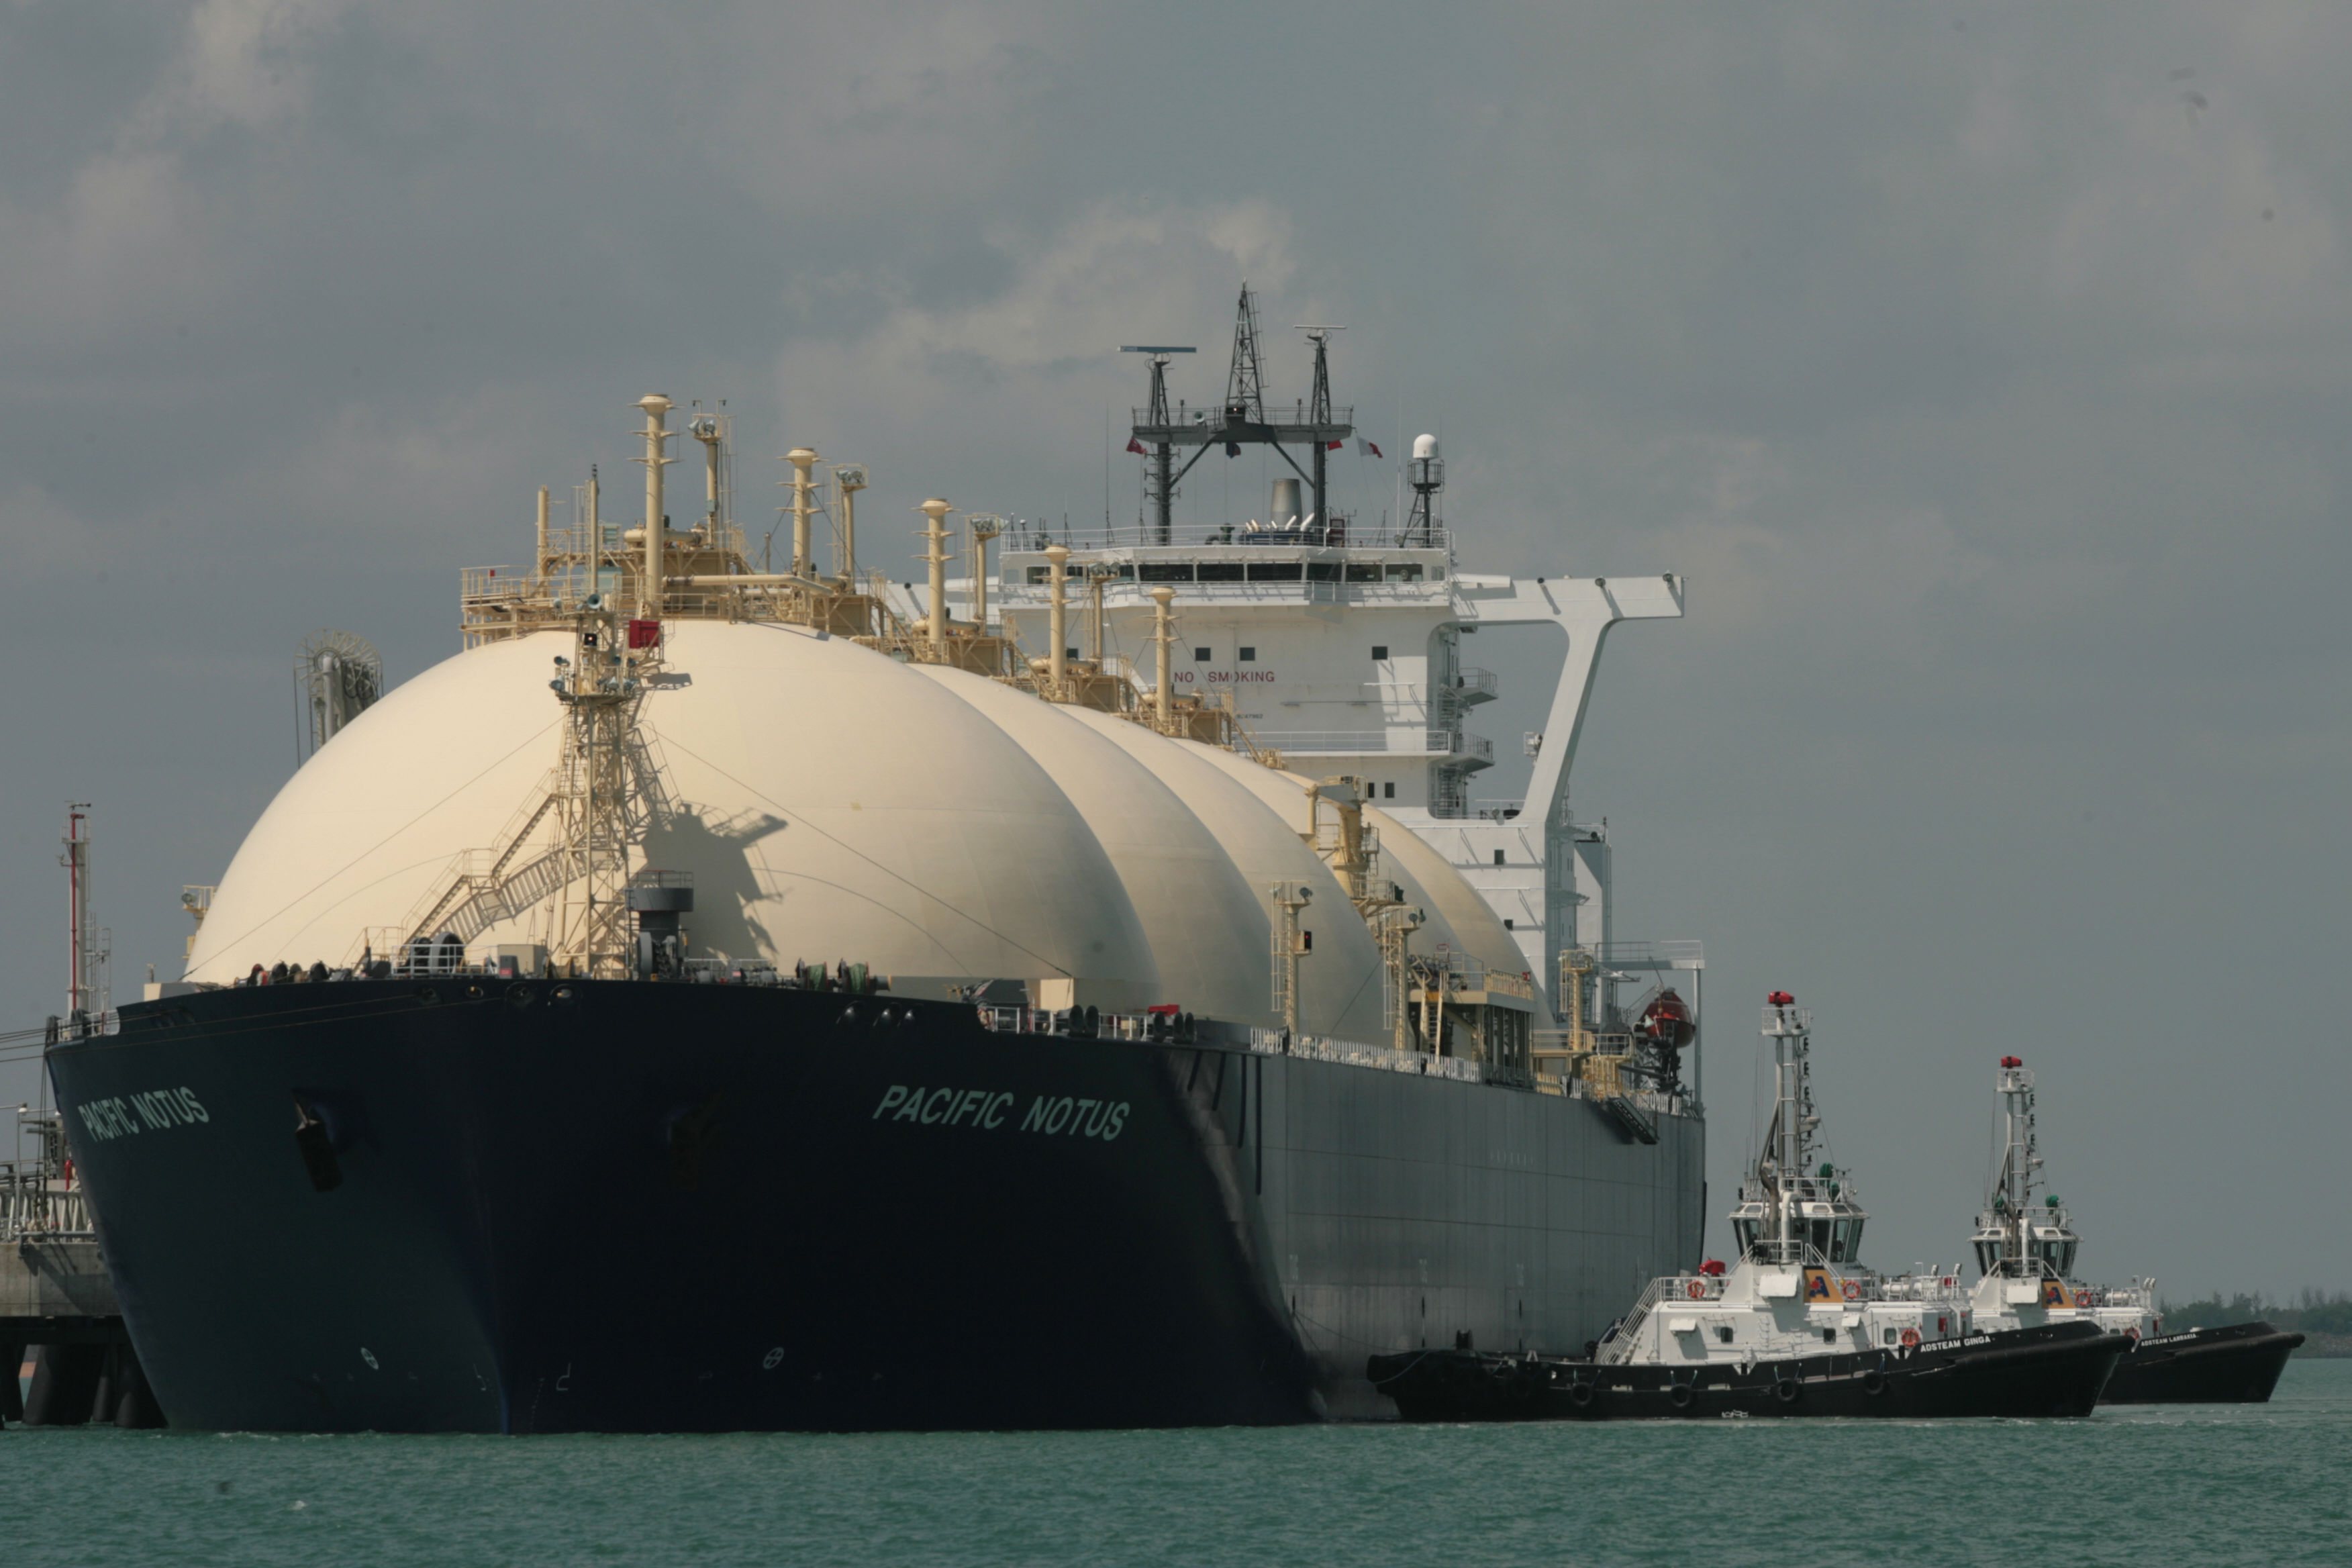 Liquified Natural Gas boat, the &#039;Pacific Notus&#039; on Darwin Port after lea